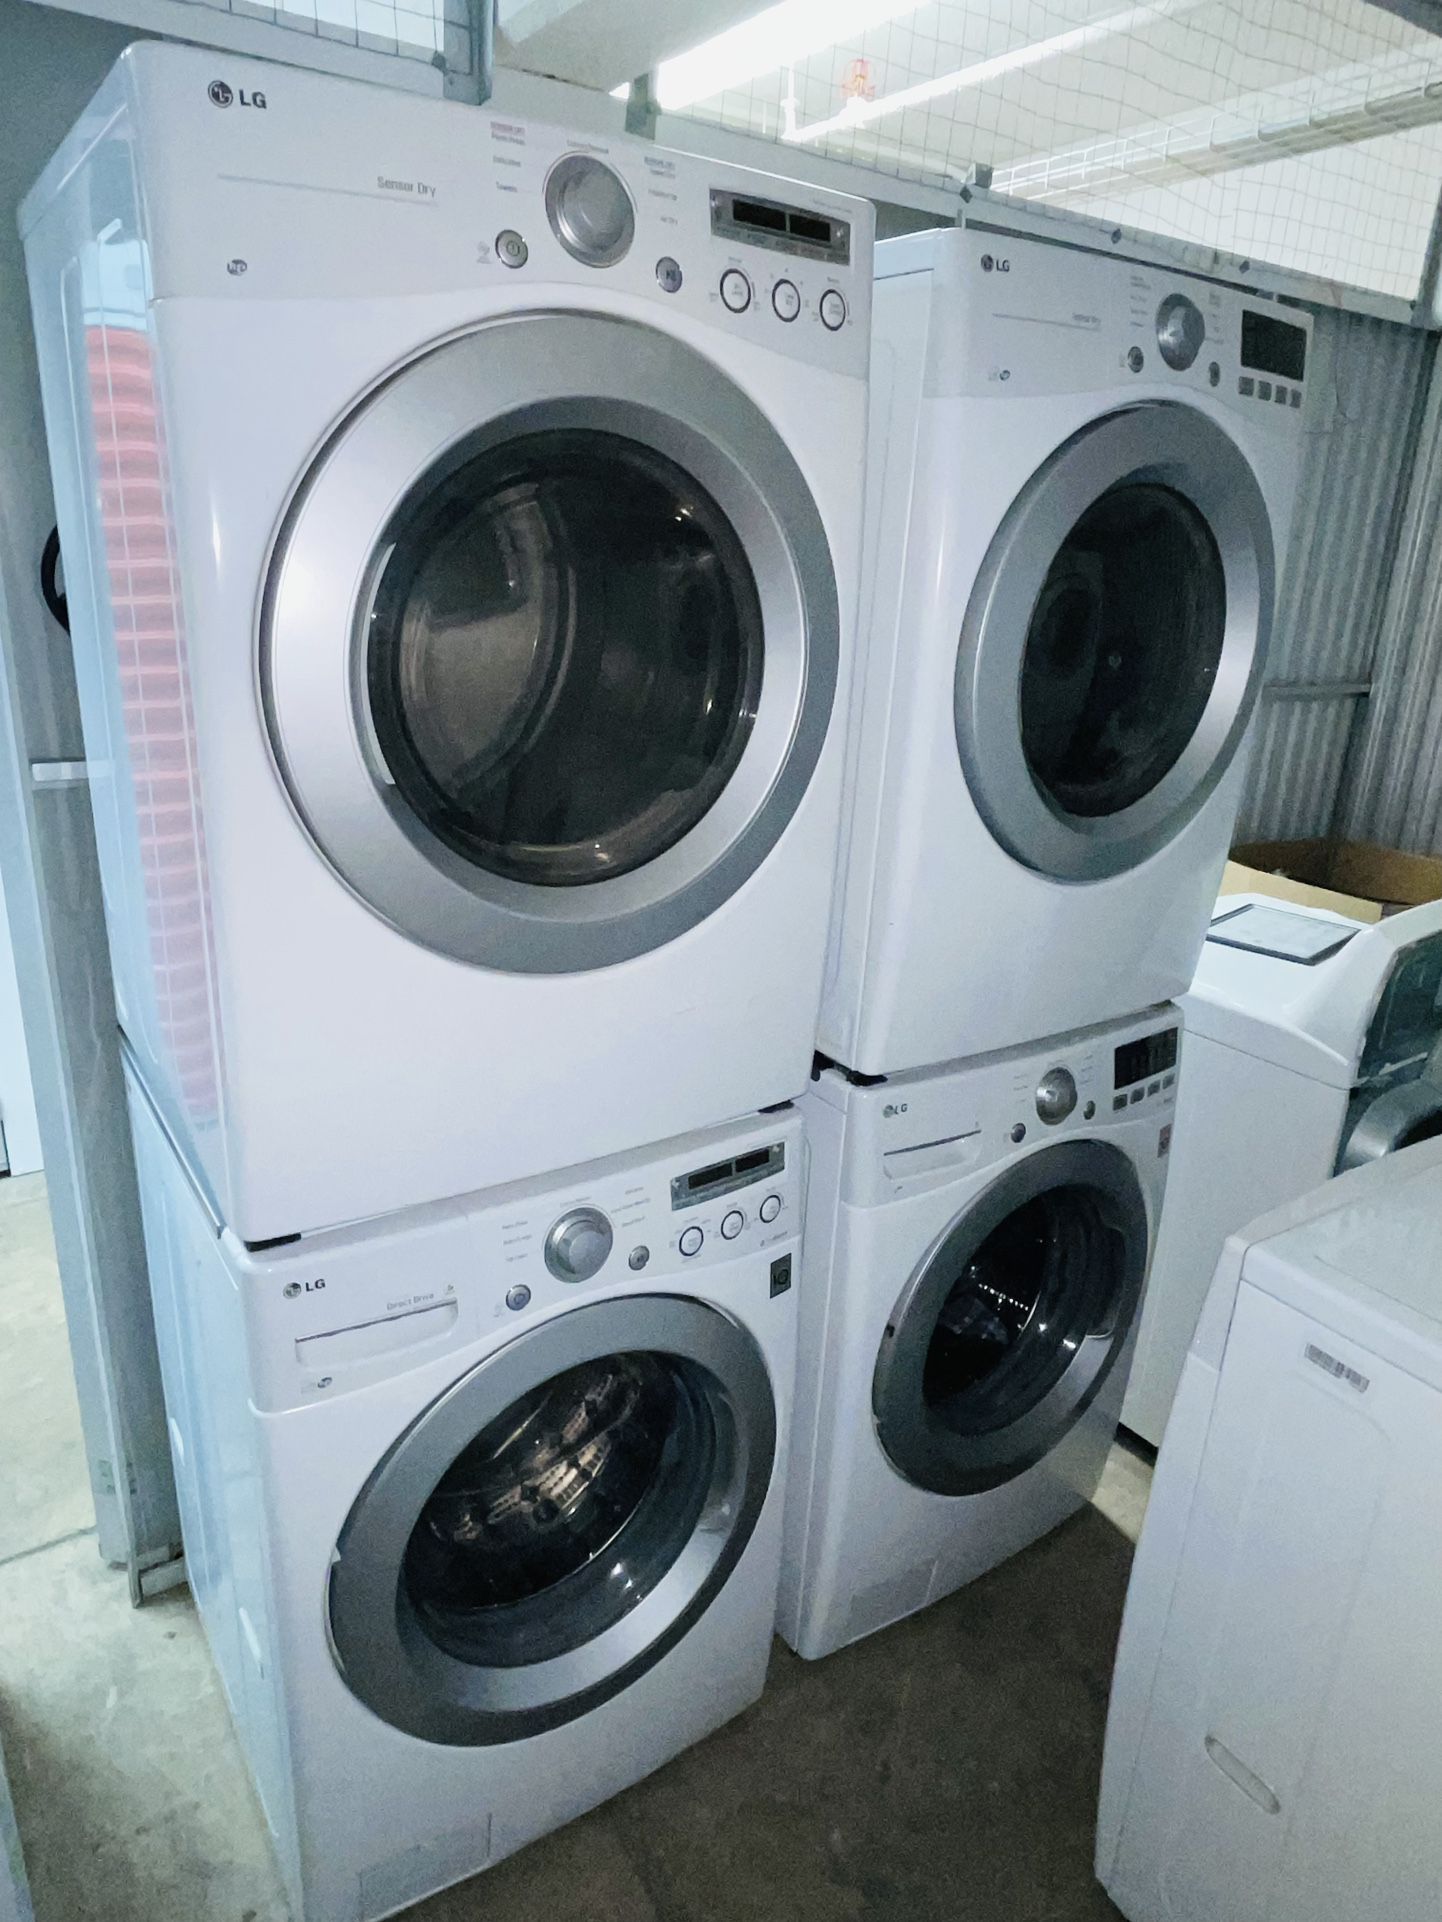 LG washer and gas dryer in very good condition a receipt for 90 days warranty